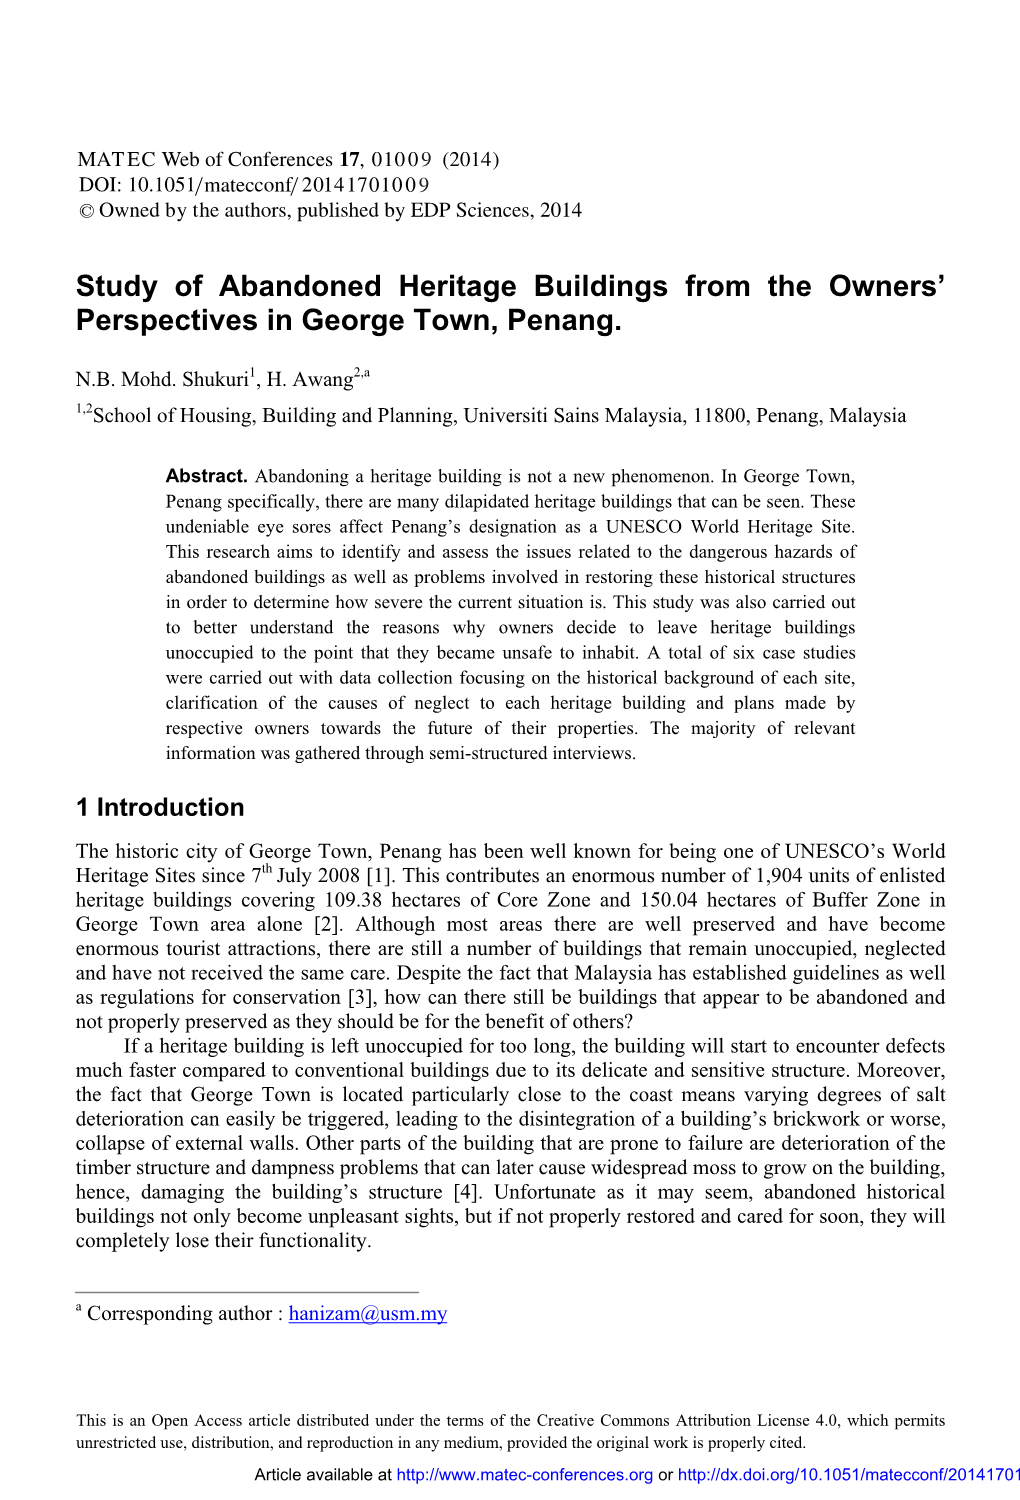 Study of Abandoned Heritage Buildings from the Owners’ Perspectives in George Town, Penang